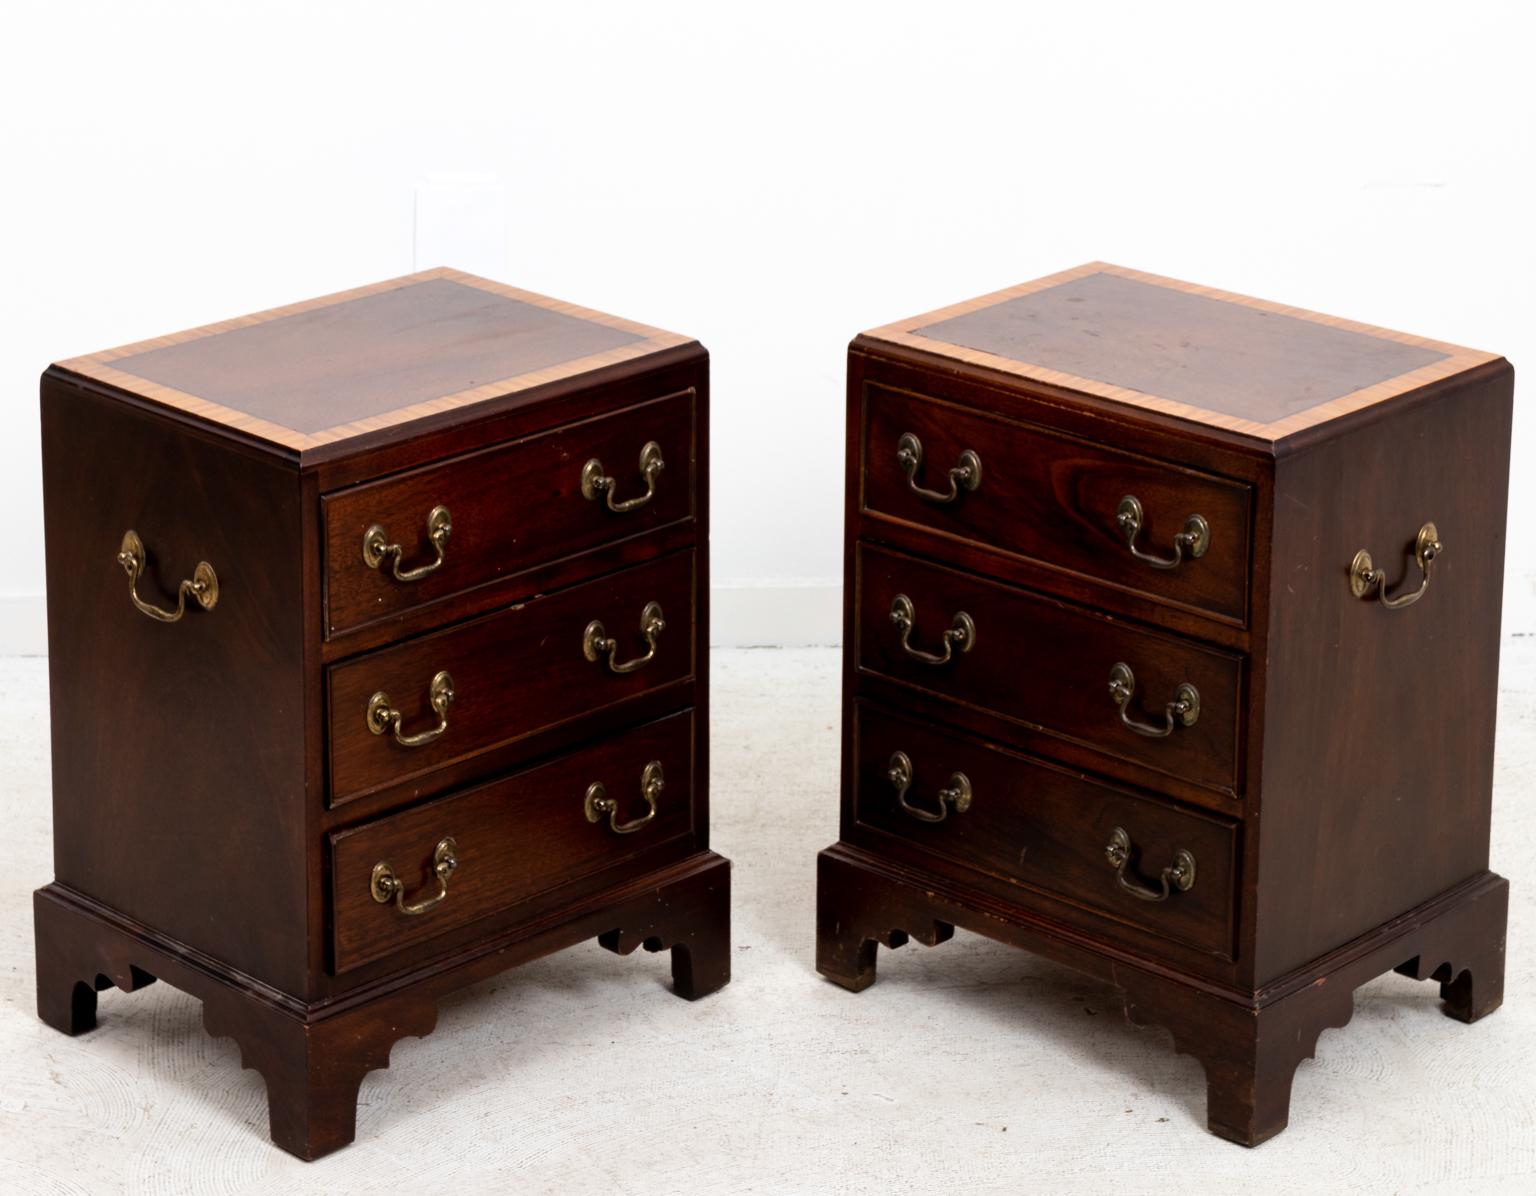 20th Century Pair of Small Mahogany Three-Tier Chest of Drawers